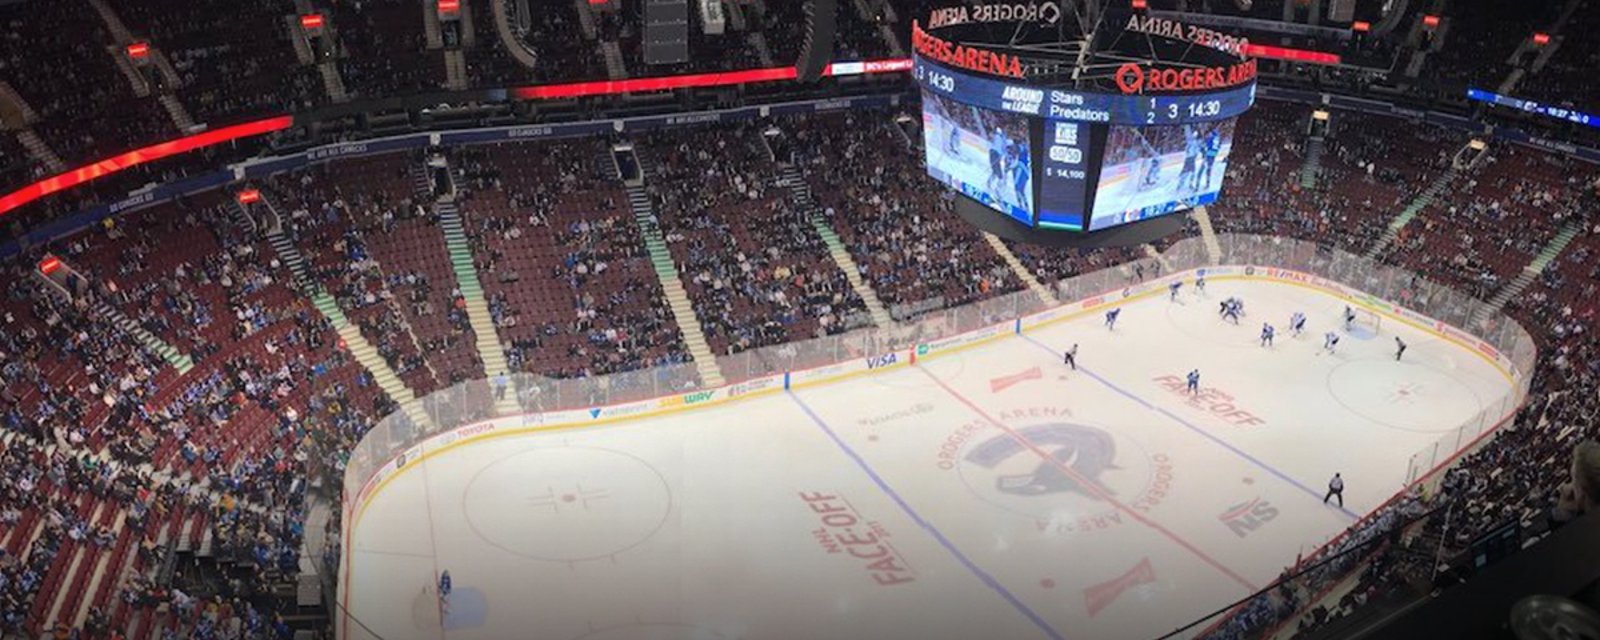 Report: Canadian team suffers worst ticket sales in over 15 years